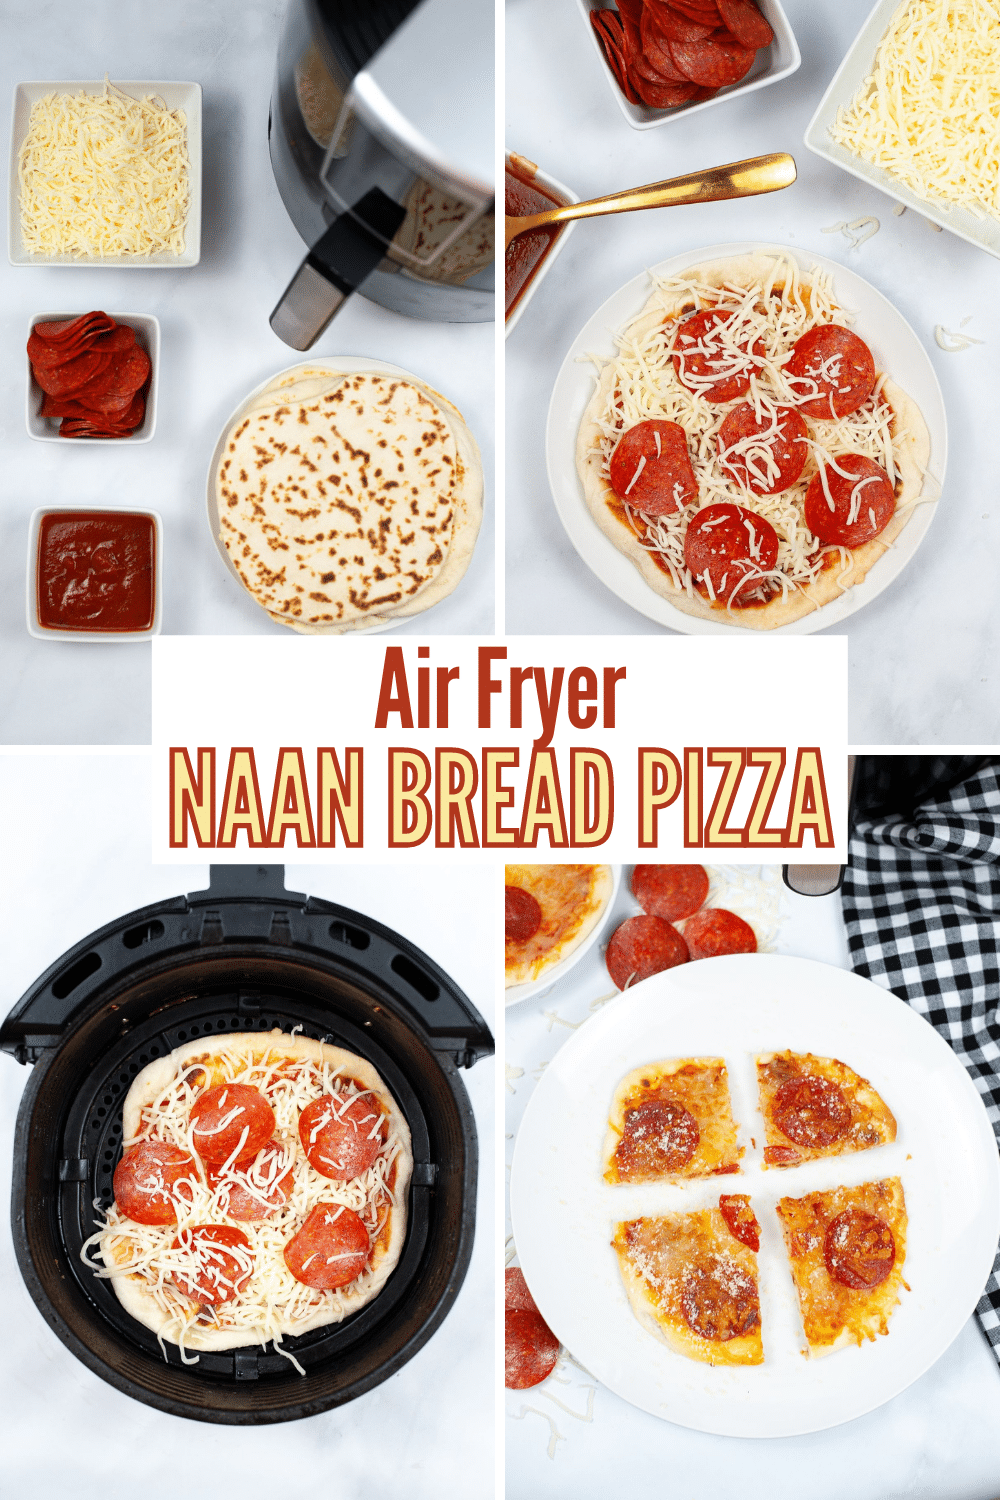 a collage of 4 images showing the steps needed to make an Air Fryer Naan Bread Pizza